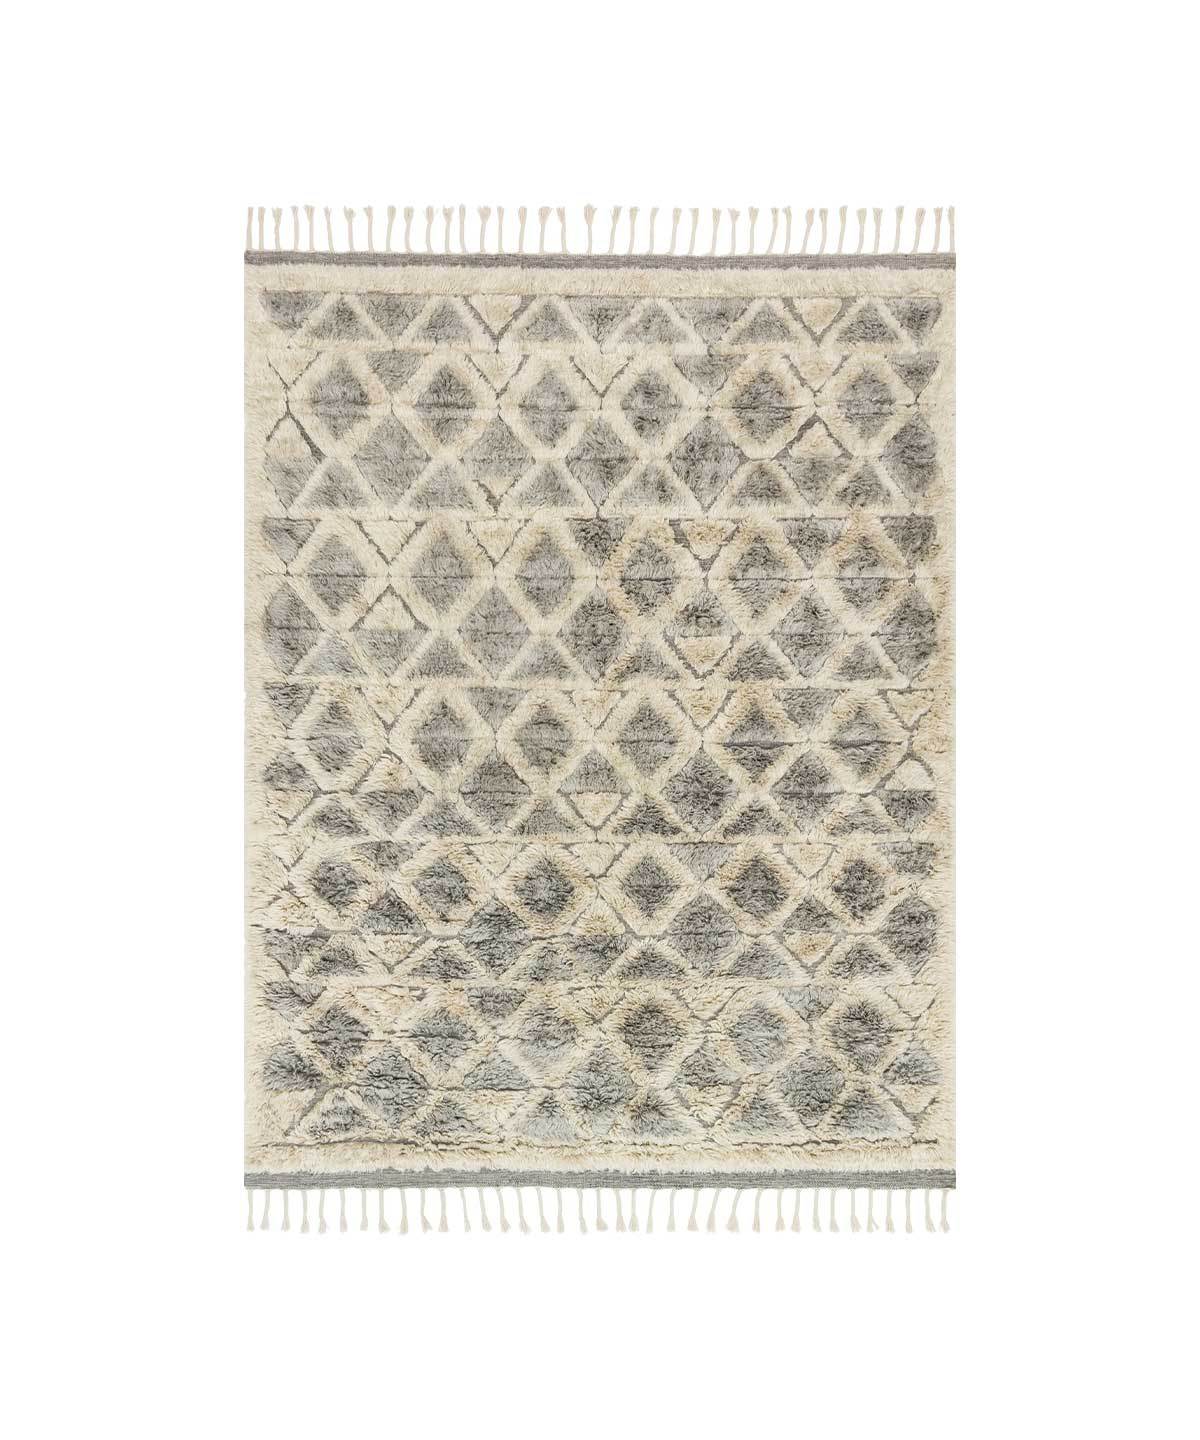 Hygge Rug in Smoke / Taupe by Loloi | TRNK